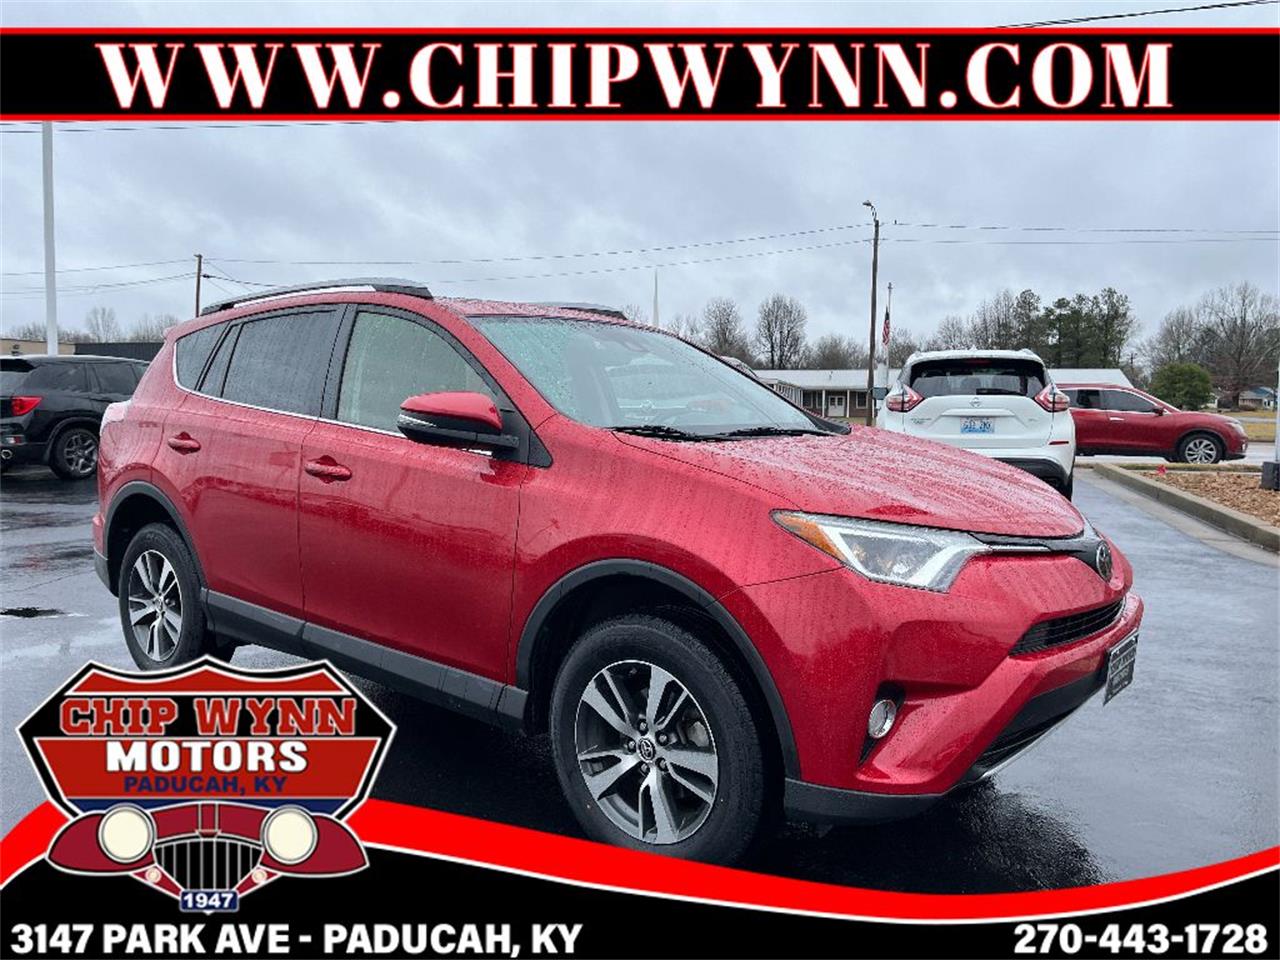 For Sale: 2017 Toyota Rav4 in Paducah, Kentucky for sale in Paducah, KY